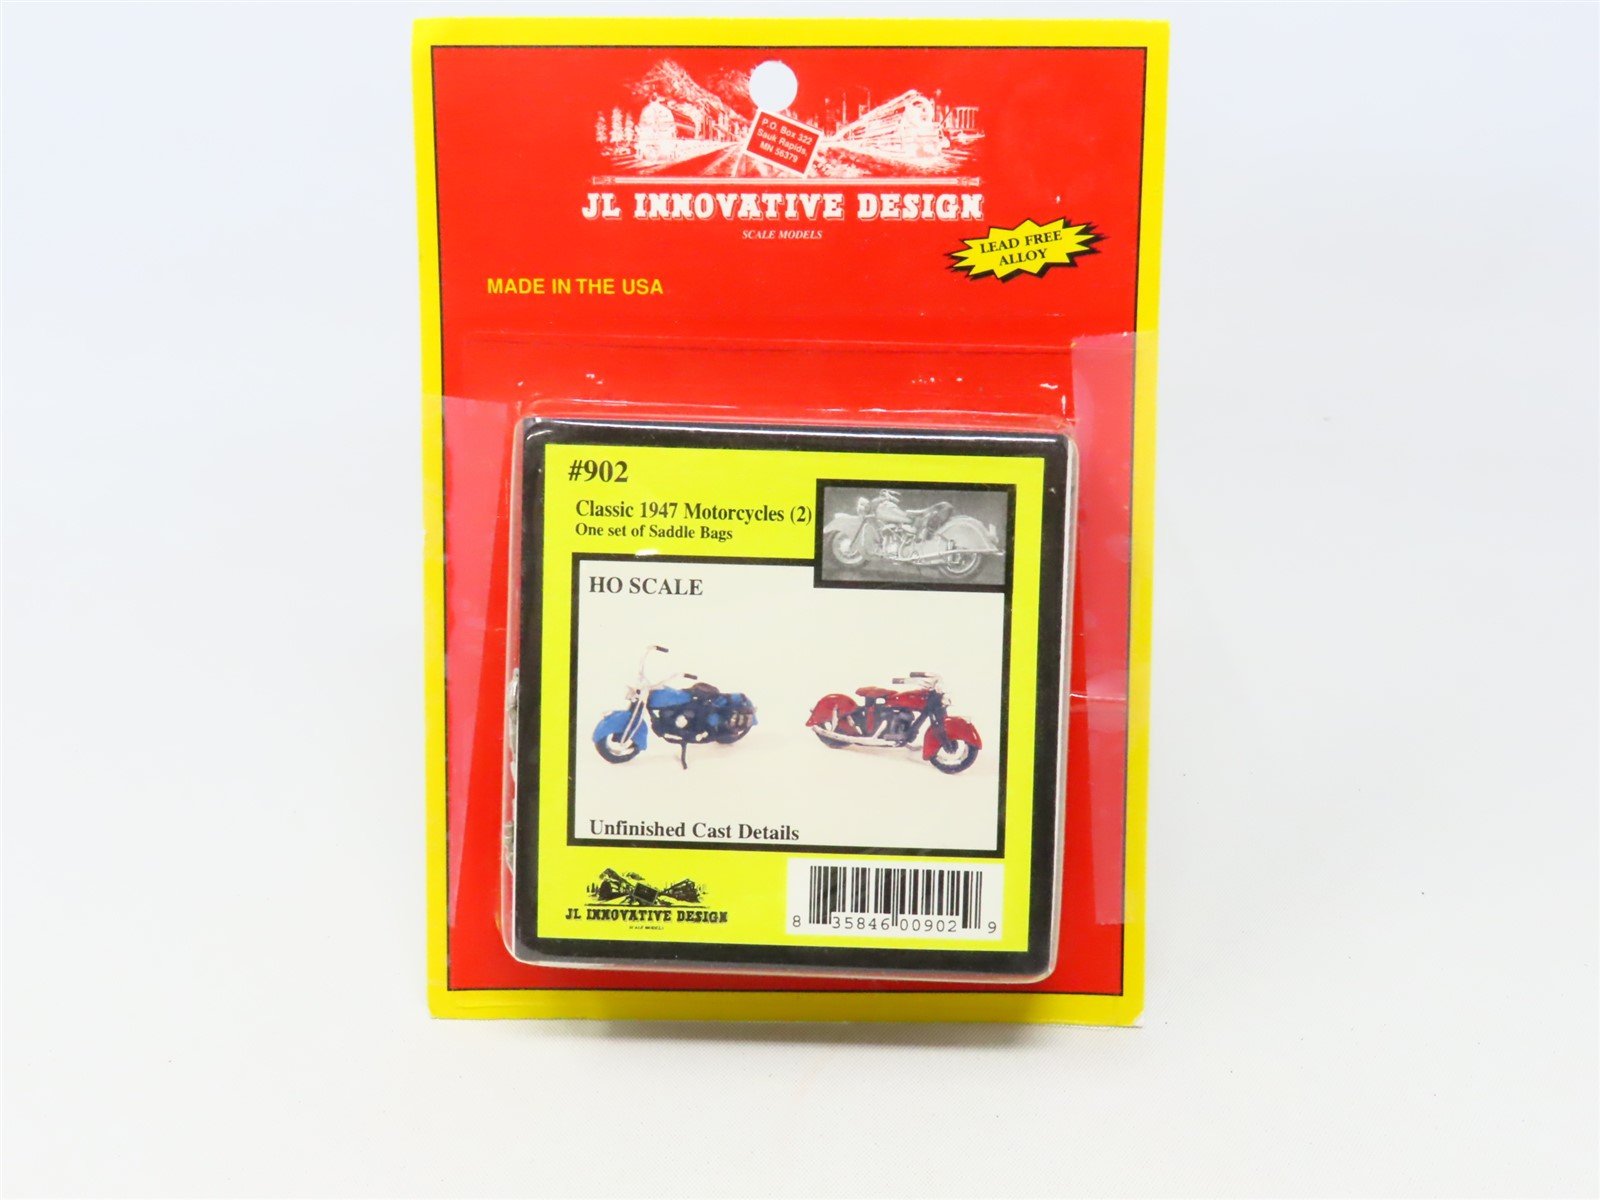 HO 1/87 Scale JL Innovative Design #902 Unfinished Classic 1947 Motorcycles (2)